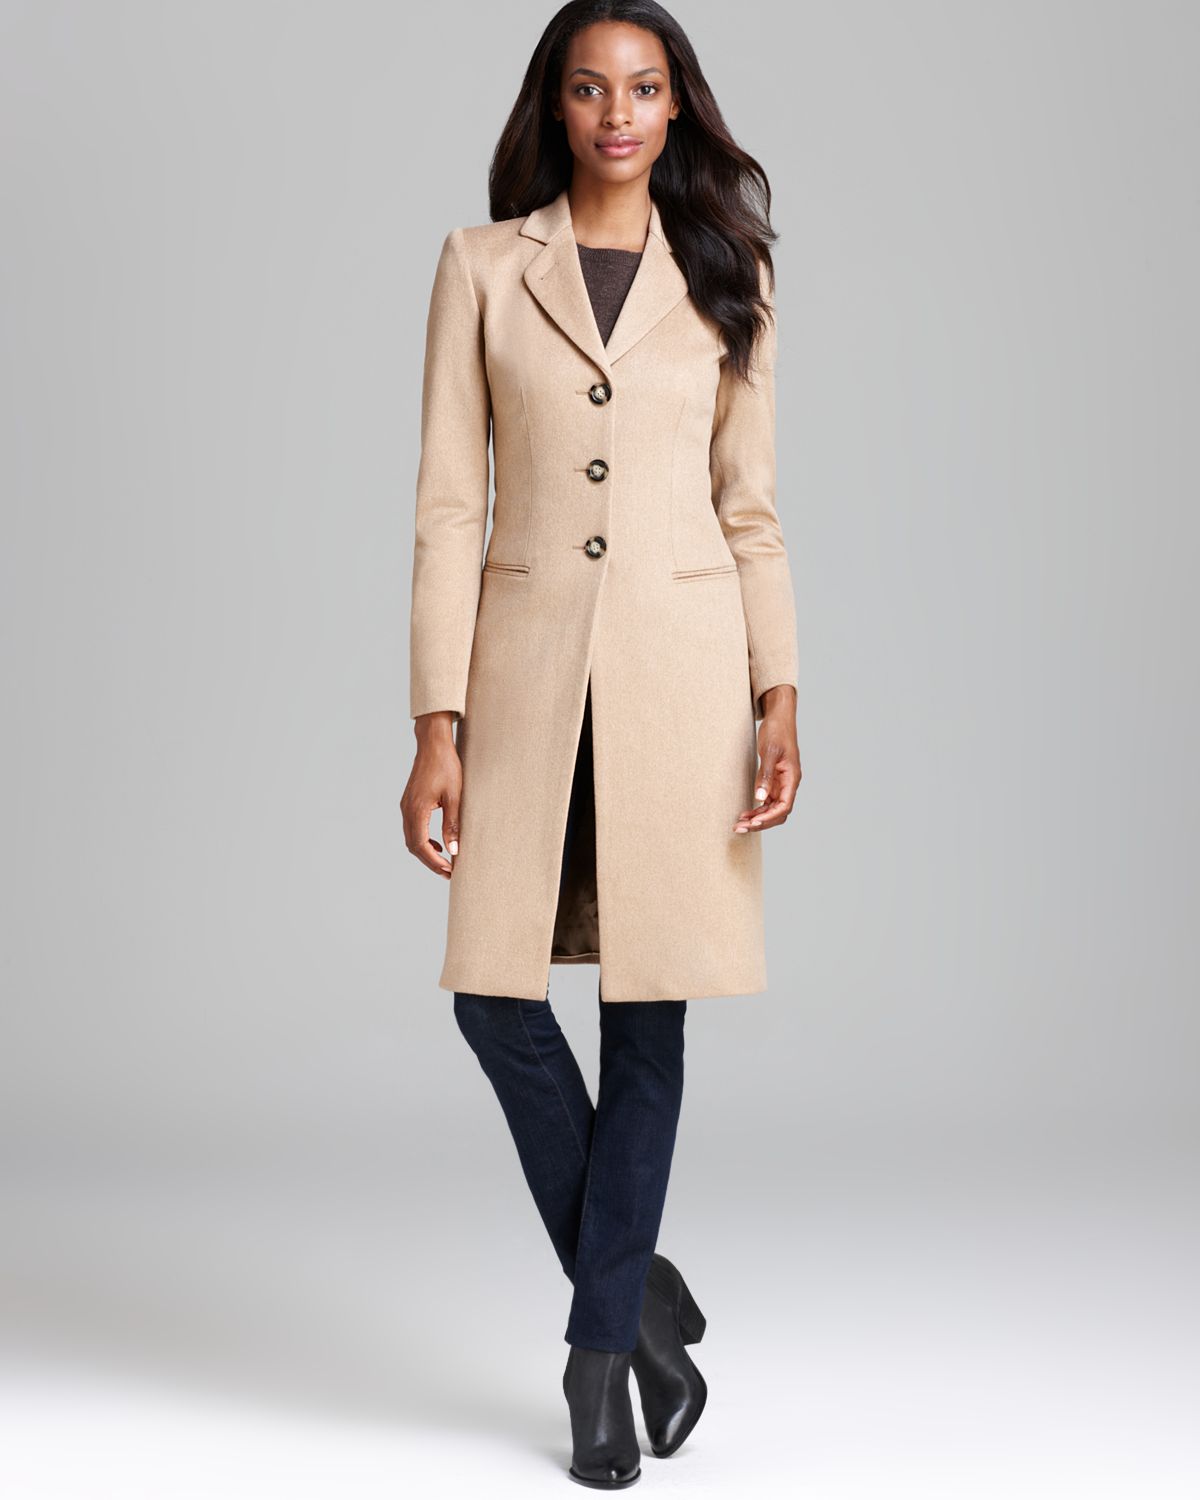 Lyst - Armani Coat Wool Notch Collar Long in Natural